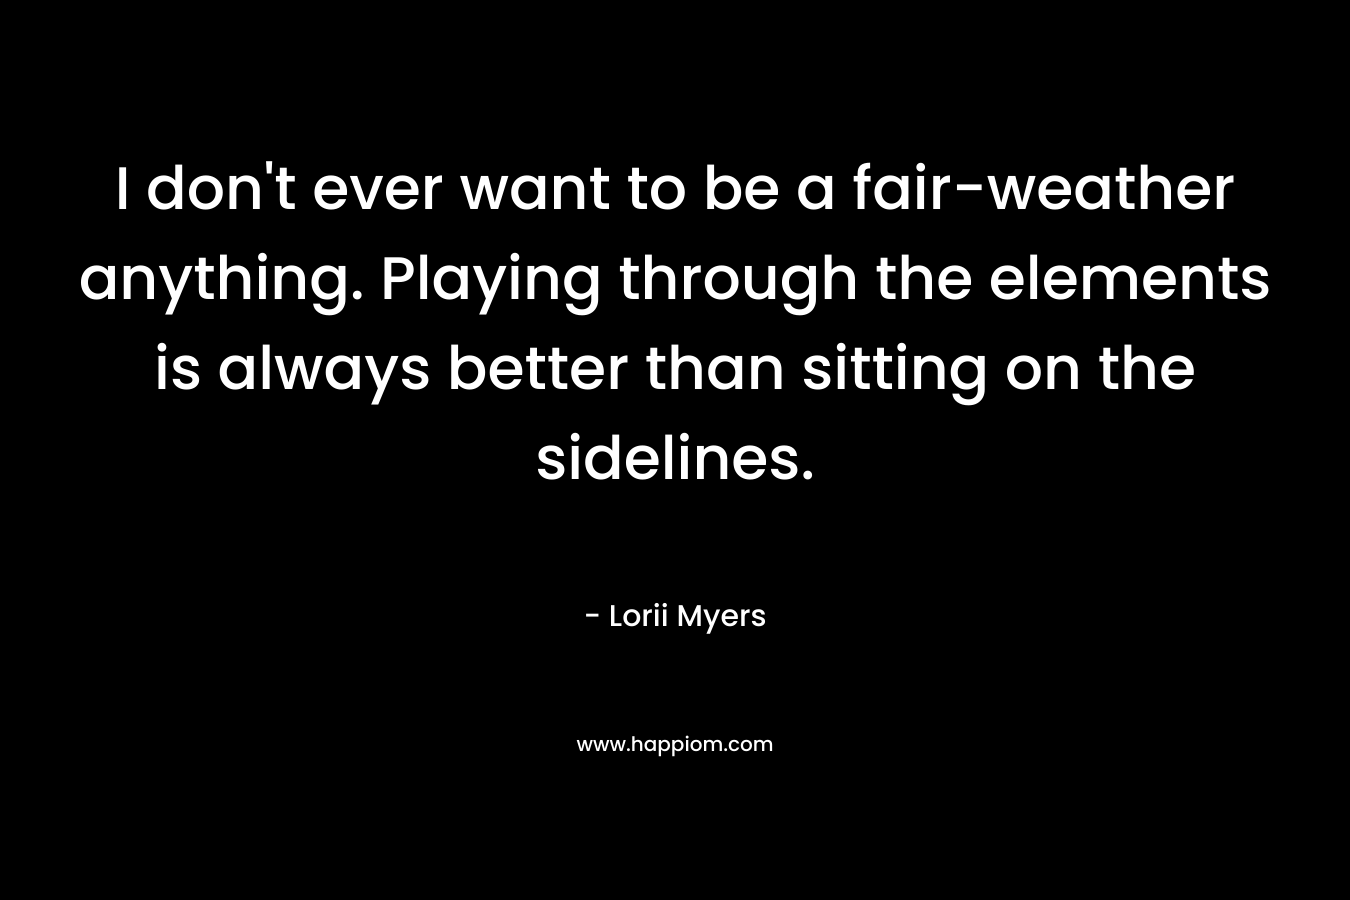 I don't ever want to be a fair-weather anything. Playing through the elements is always better than sitting on the sidelines.